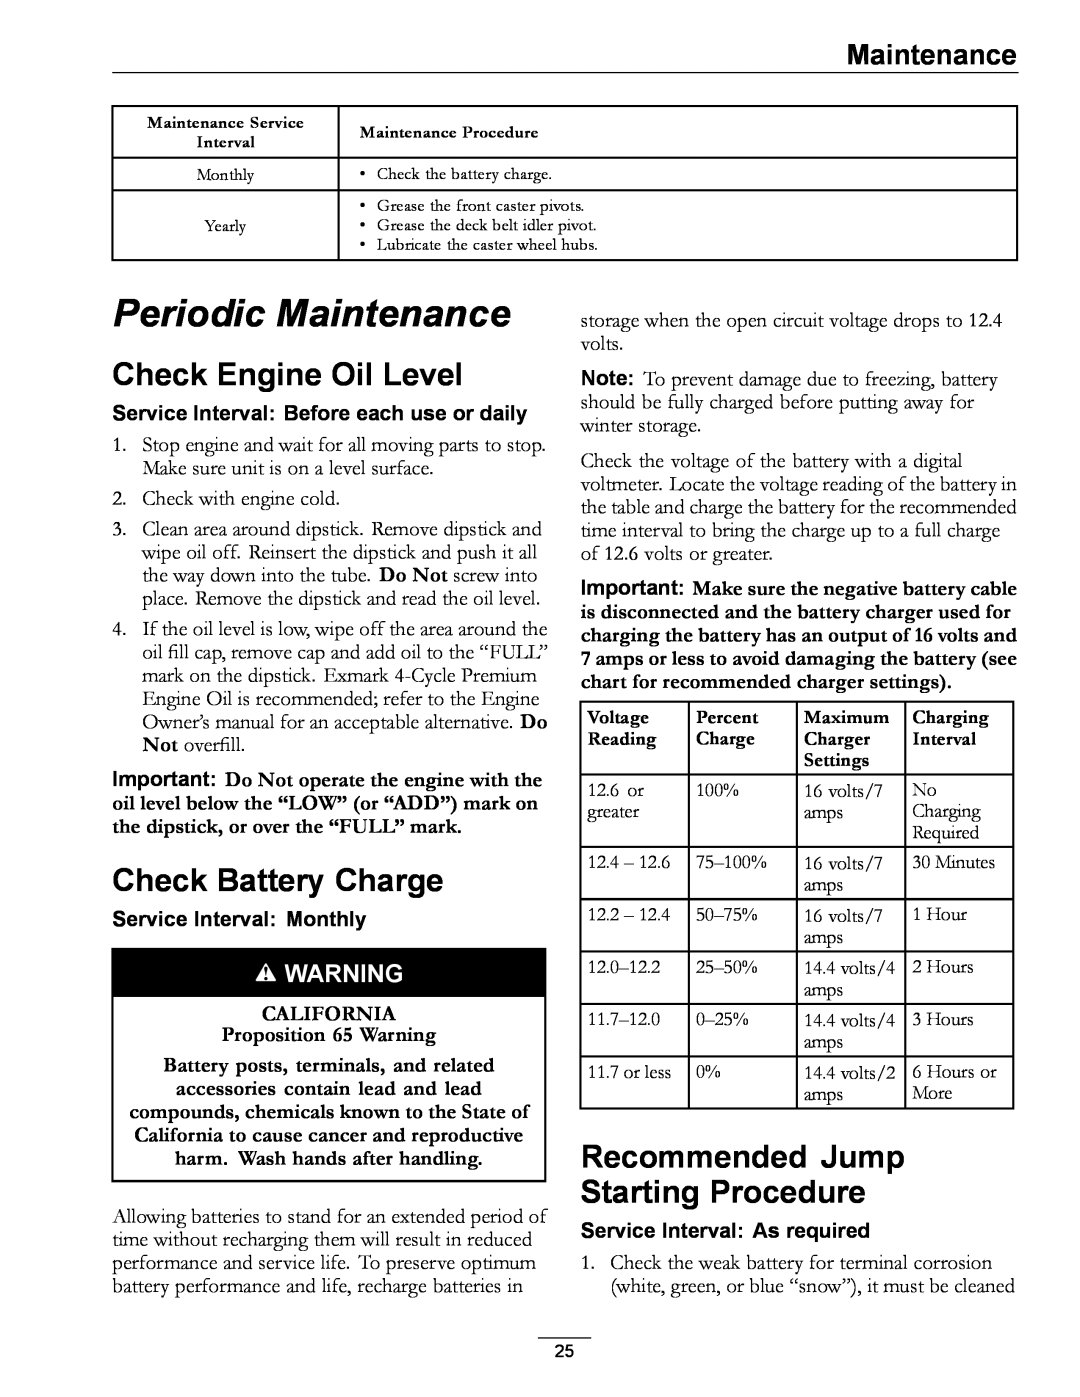 Exmark 920 manual Periodic Maintenance, Check Engine Oil Level, Check Battery Charge, Recommended Jump Starting Procedure 